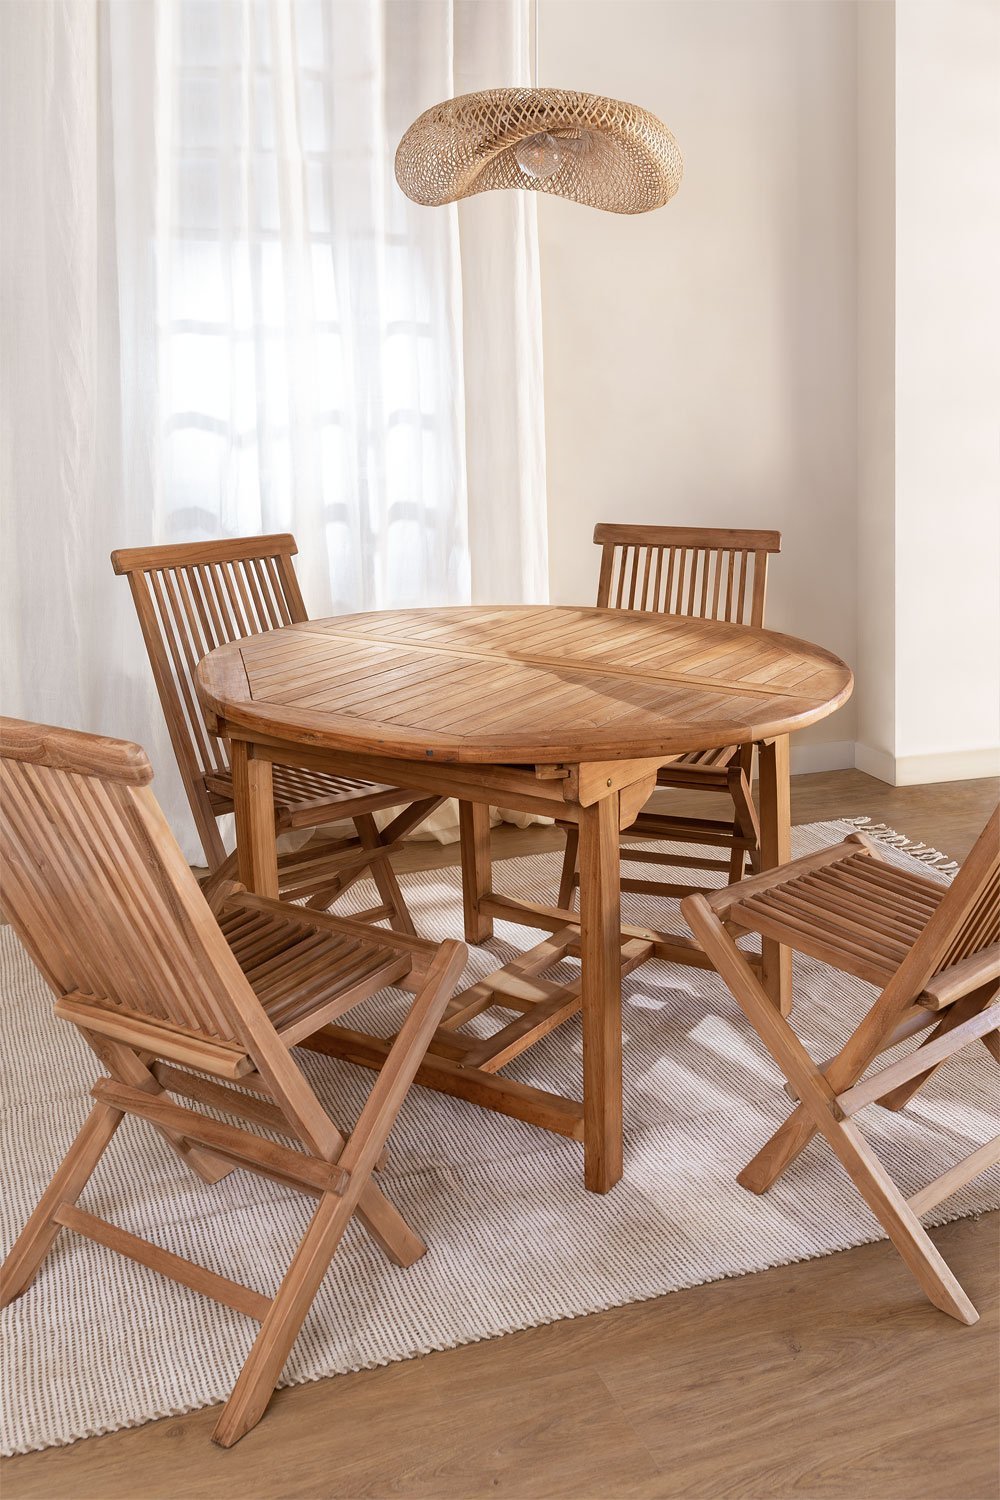 Set of 4 Foldable Teak Wood Chairs & Extendable Table (120-170 x 75 cm) Pira , gallery image 1